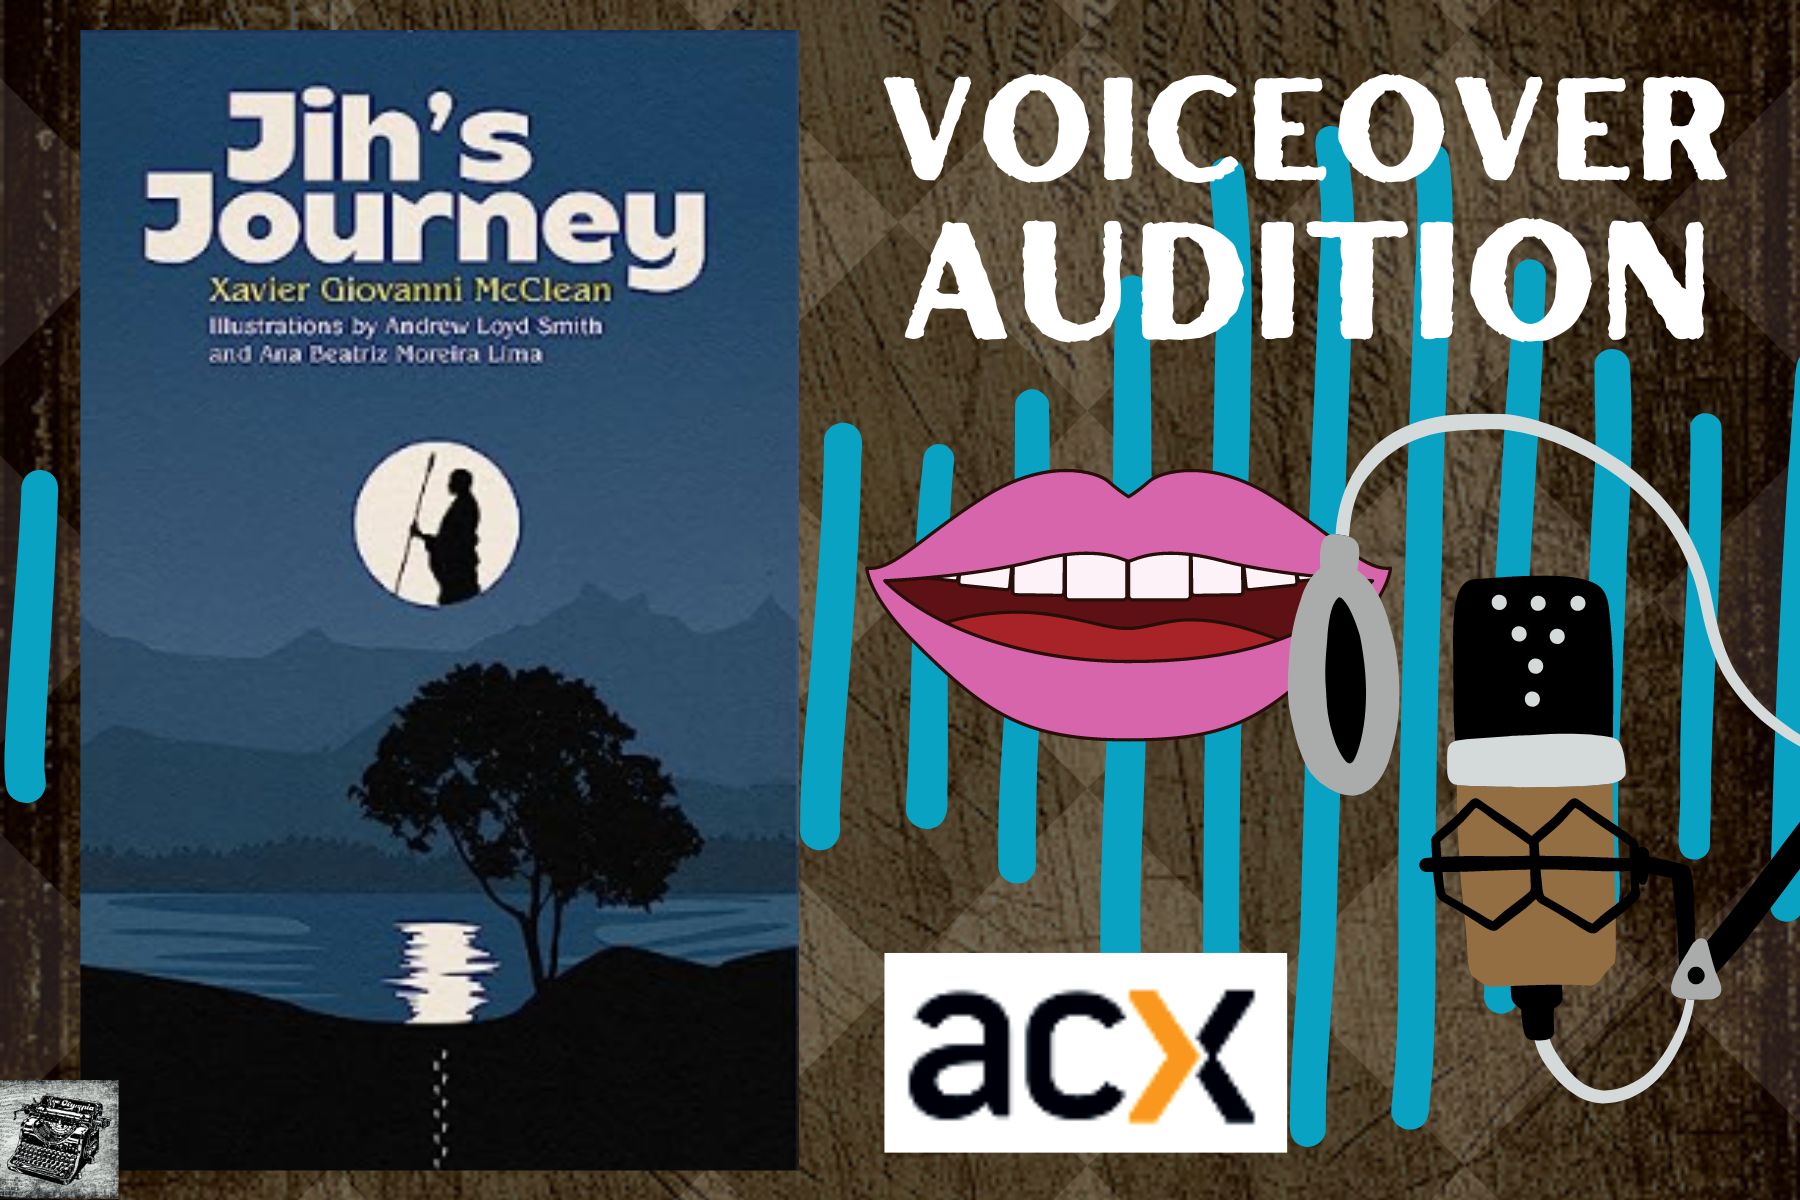 jih's journey, voiceover audition, ACX audition